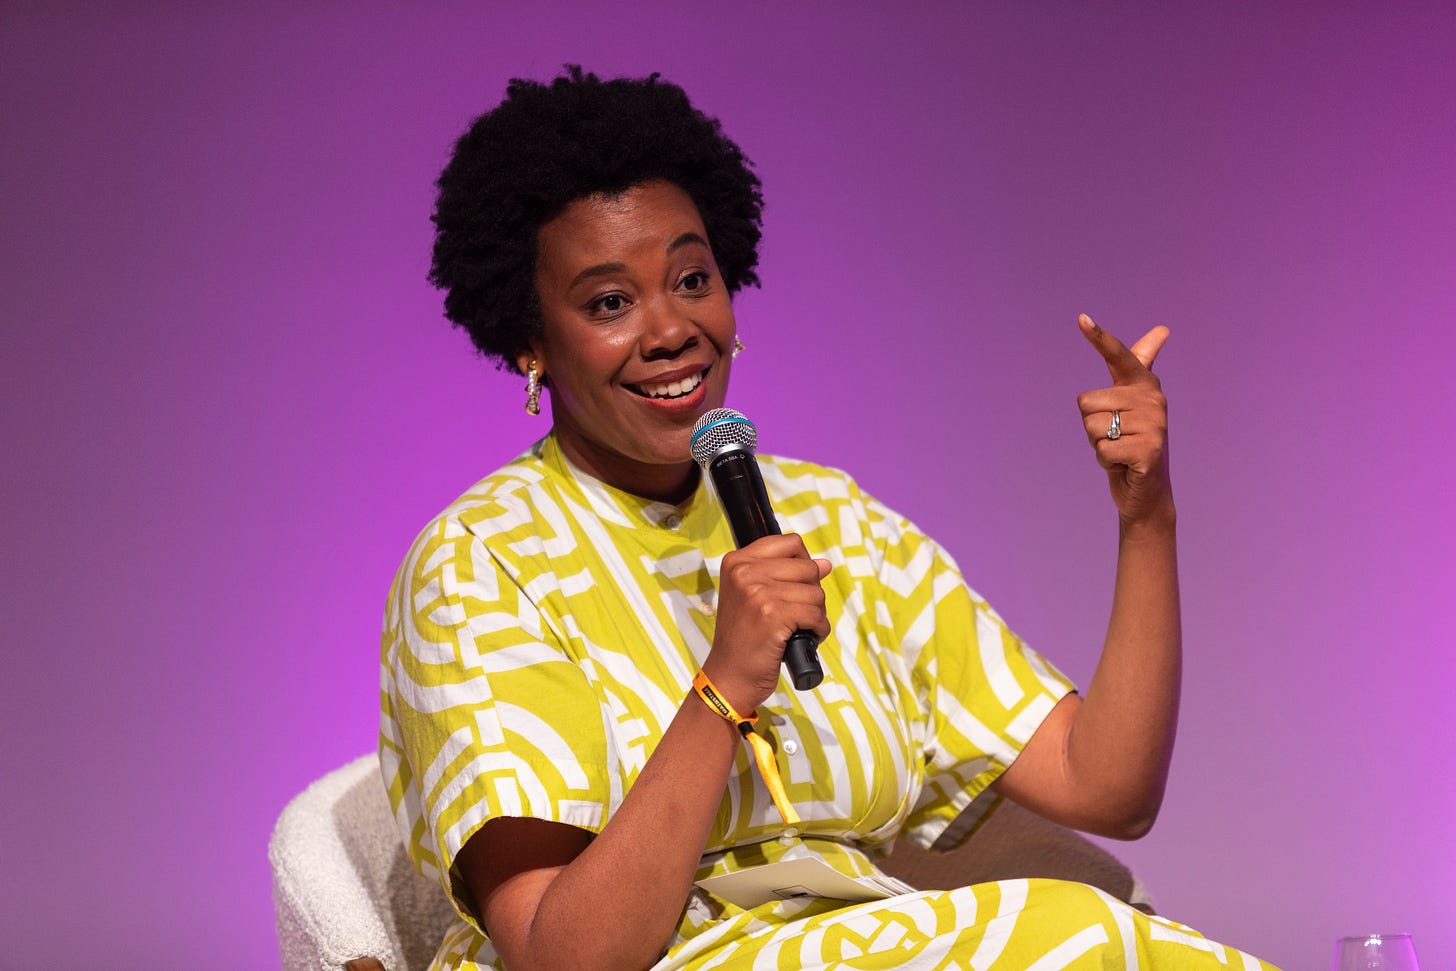 Jen seated and holding a microphone, wearing a patterned yellow dress and with a purple background behind her